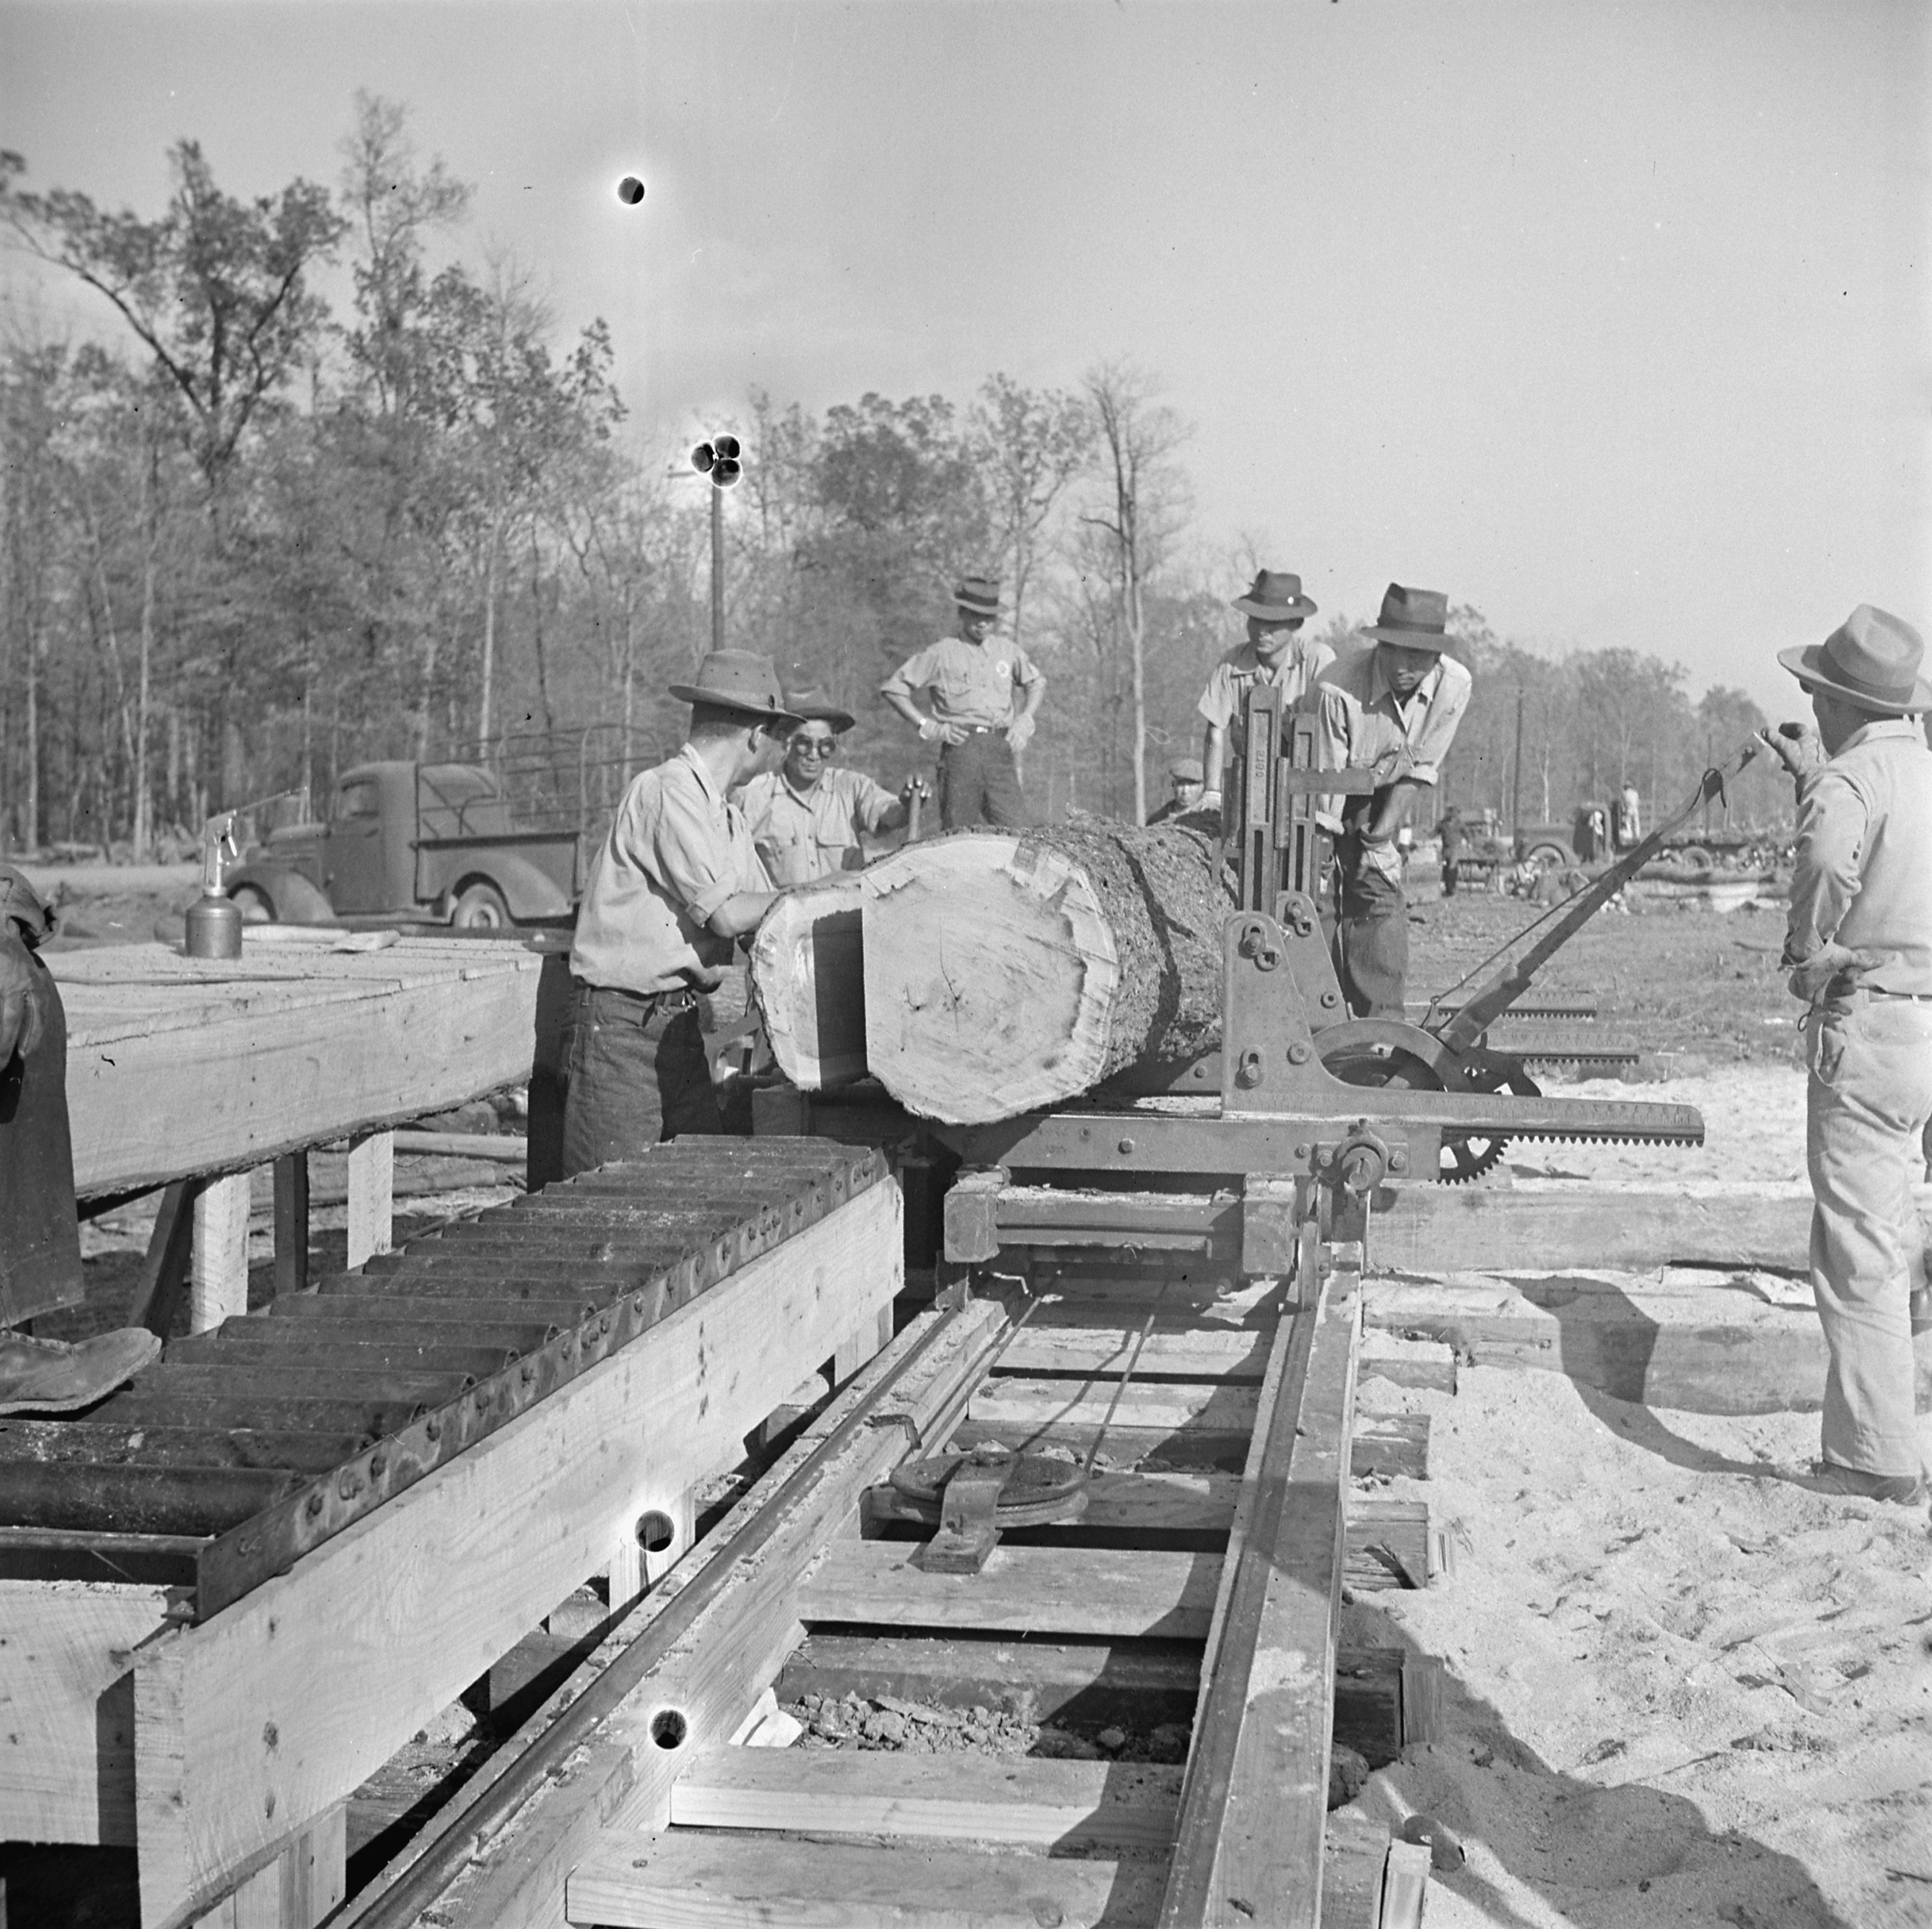 Men working at a saw mill, Jerome War Relocation Center, Arkansas, United States, 16 Nov 1942, photo 2 of 2